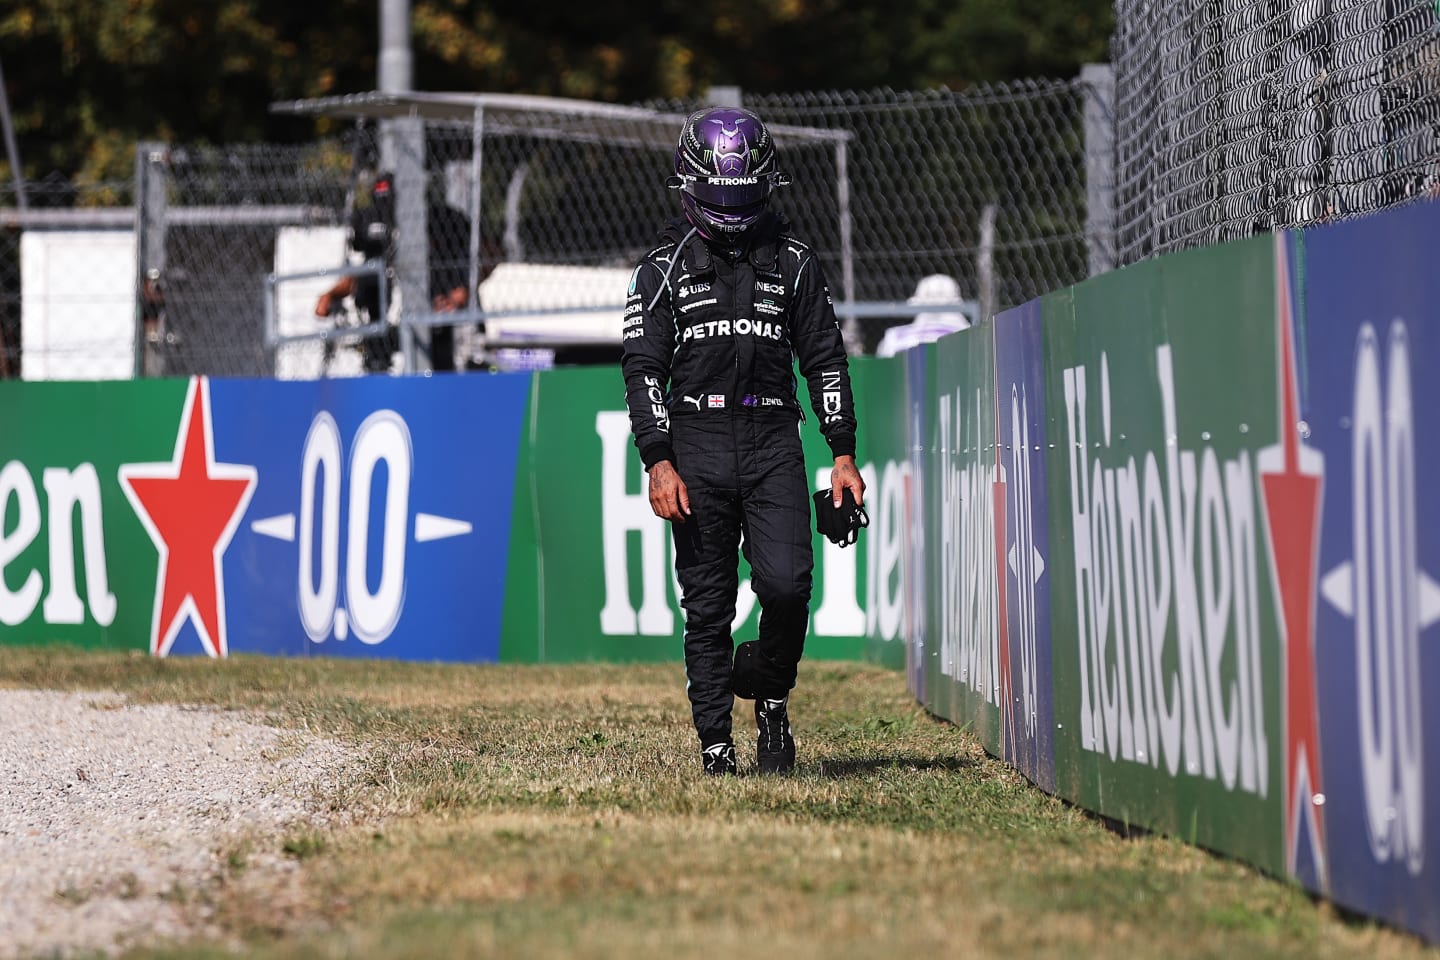 MONZA, ITALY - SEPTEMBER 12: Lewis Hamilton of Great Britain and Mercedes GP walks back to the pits after crashing during the F1 Grand Prix of Italy at Autodromo di Monza on September 12, 2021 in Monza, Italy. (Photo by Lars Baron/Getty Images)